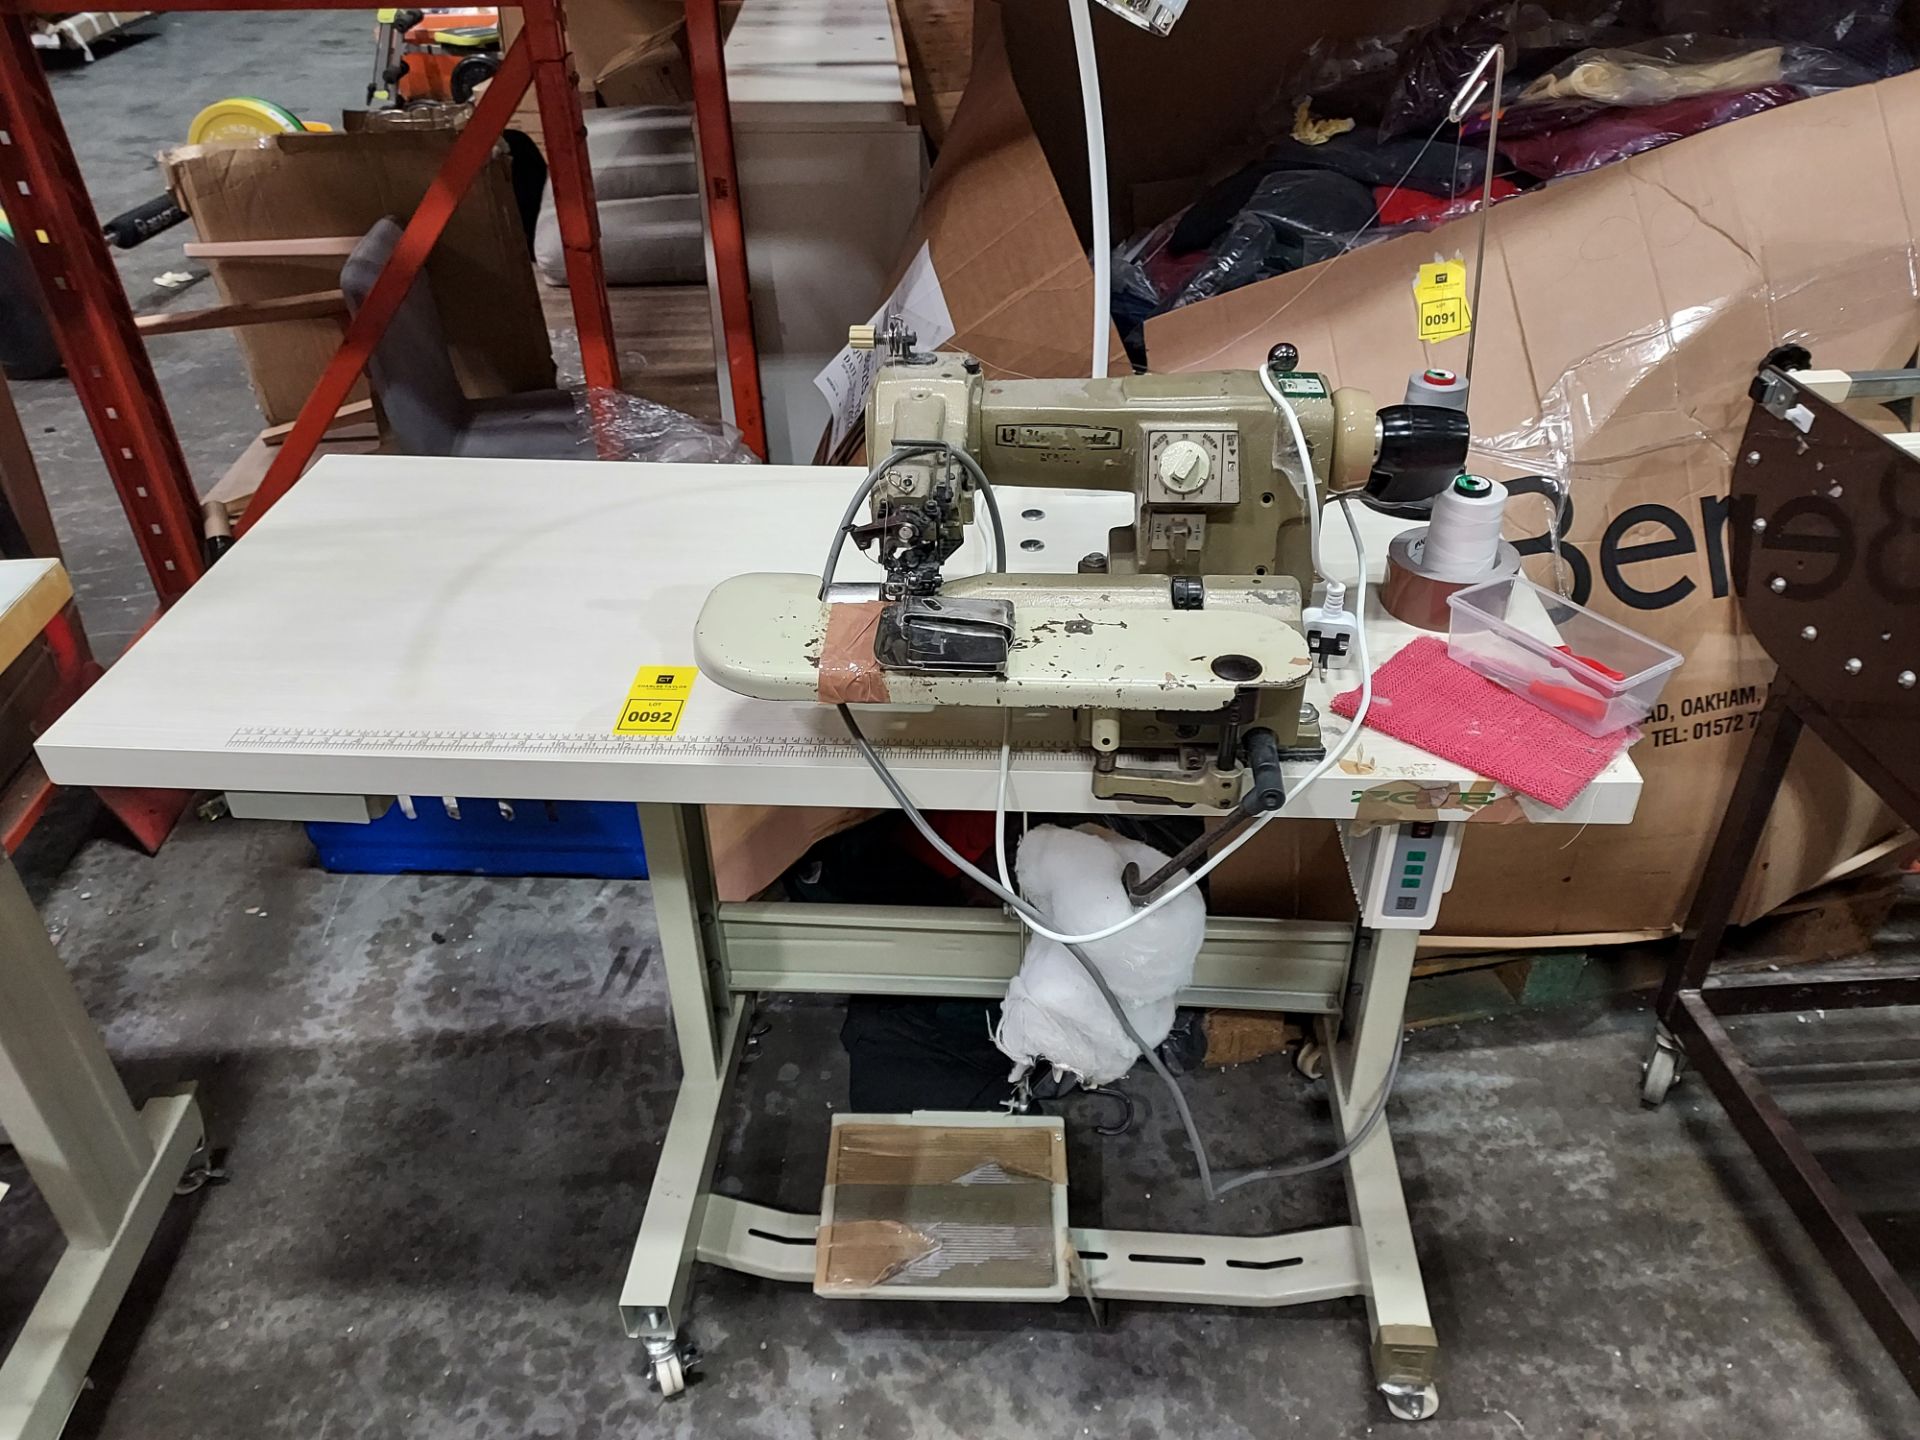 1 X UNION SPECIAL (37500-8 ) BLIND STITCH SEWING MACHINE - WITH FOOT PEDAL AND TABLE